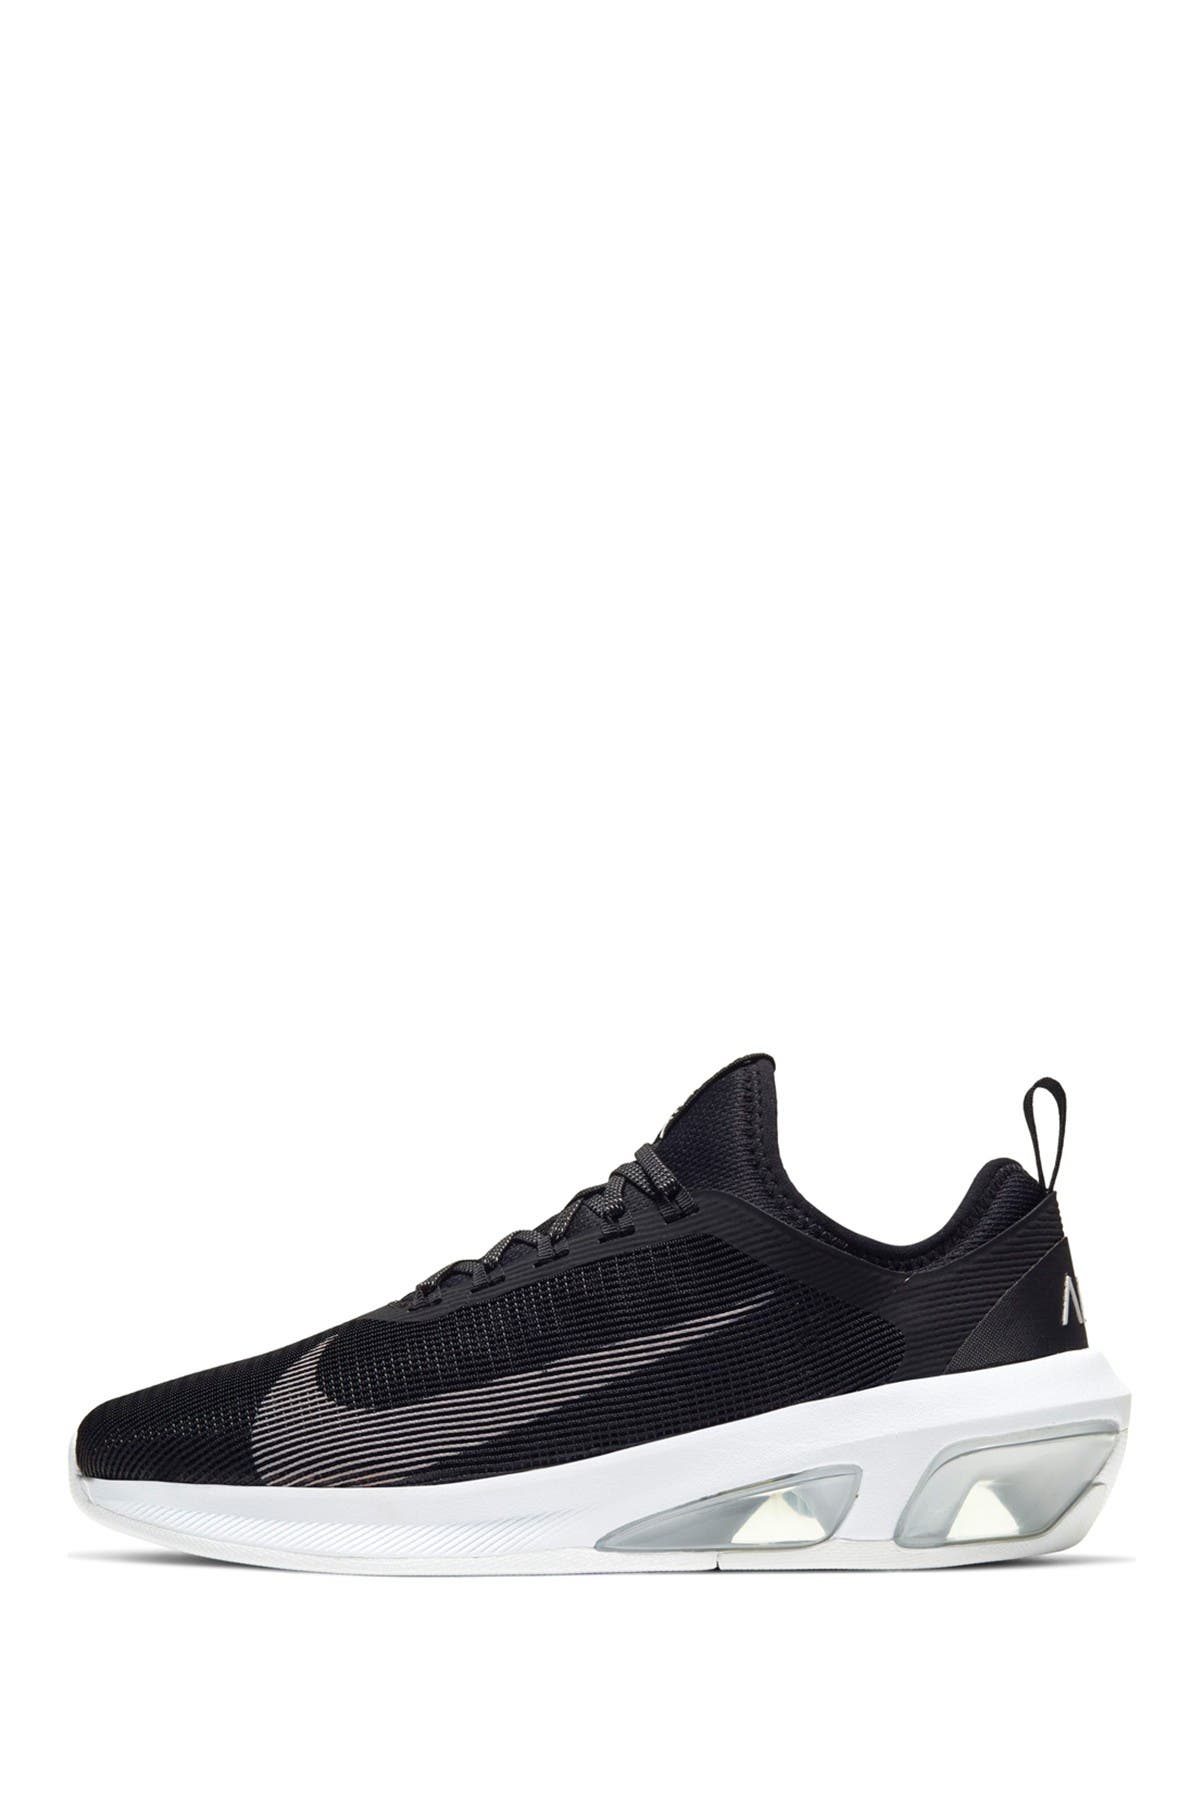 women's nike air max fly